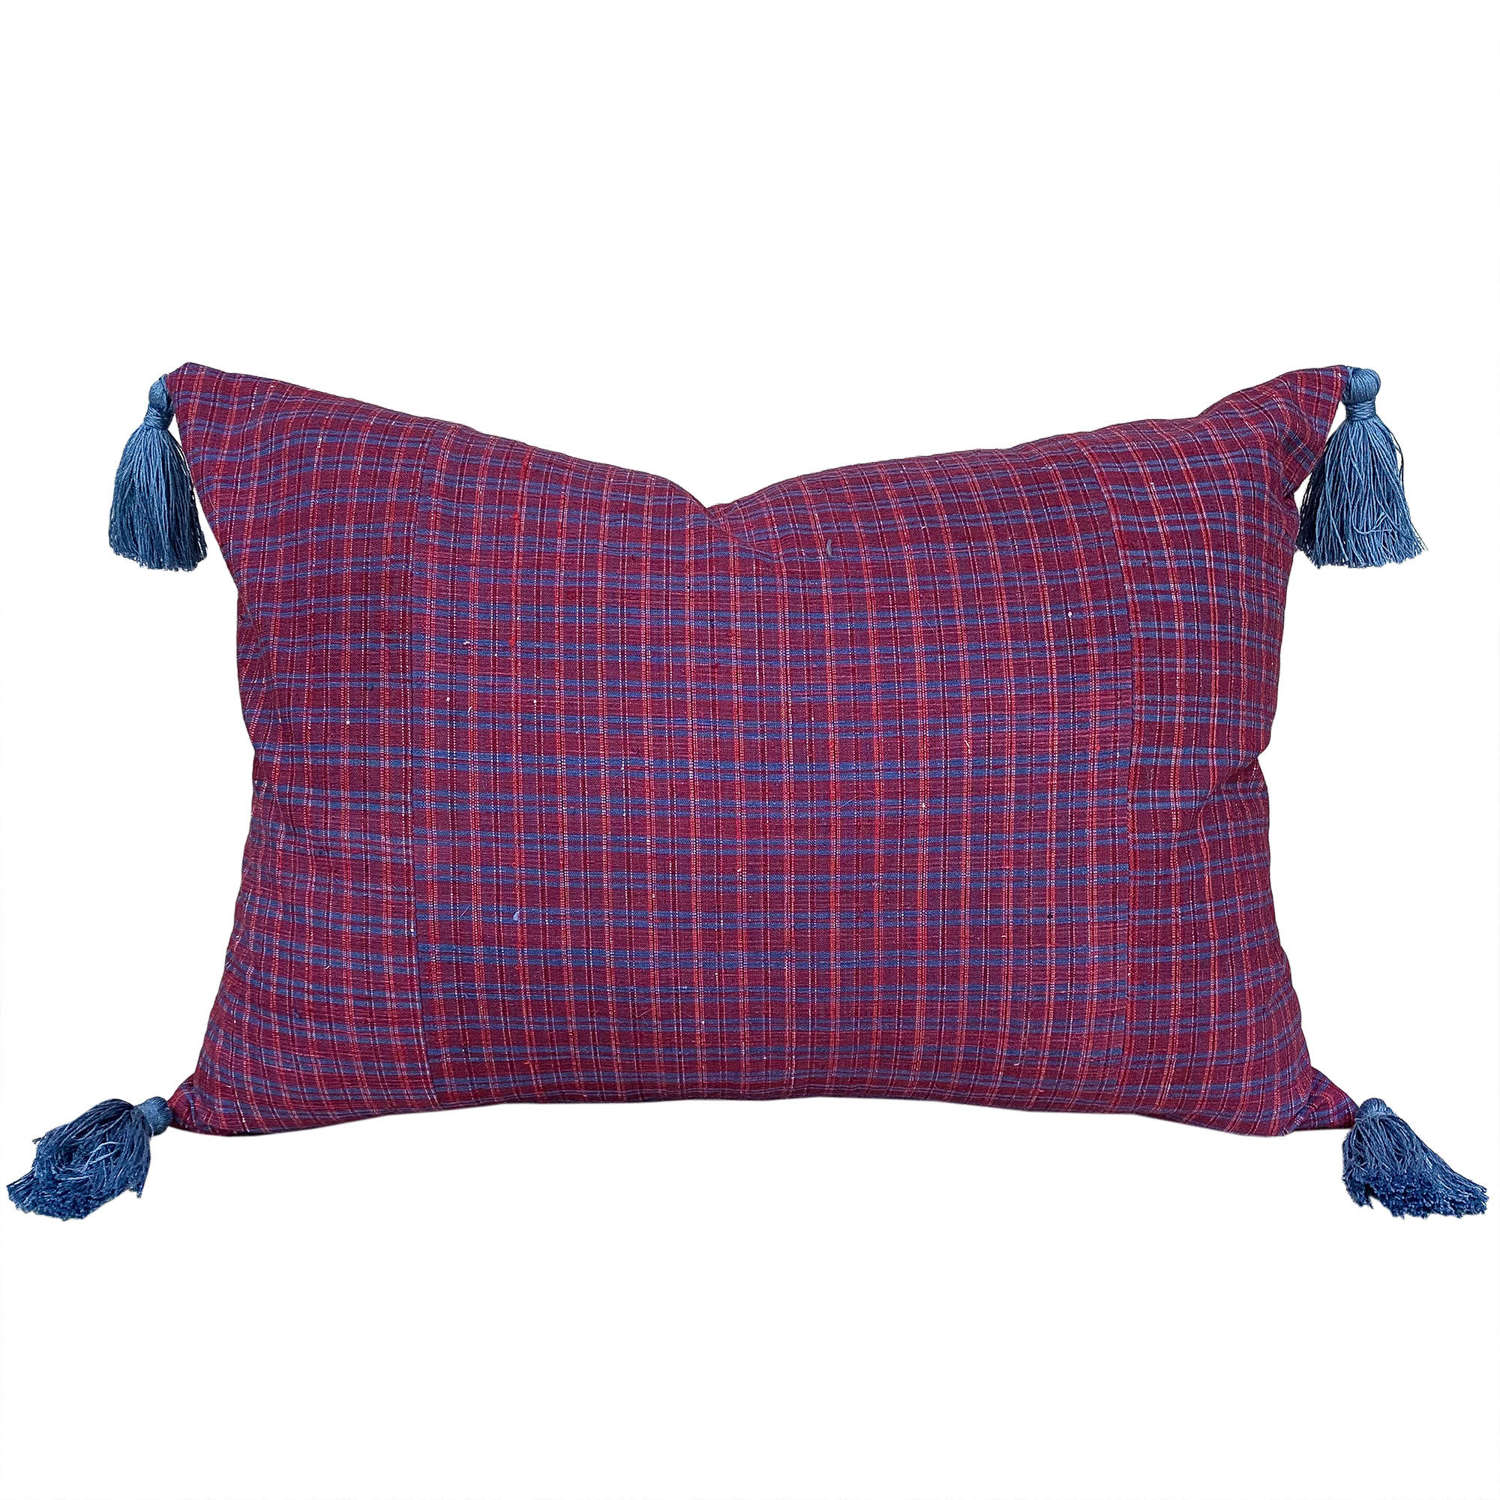 Songjiang Cushion With Blue Tassels